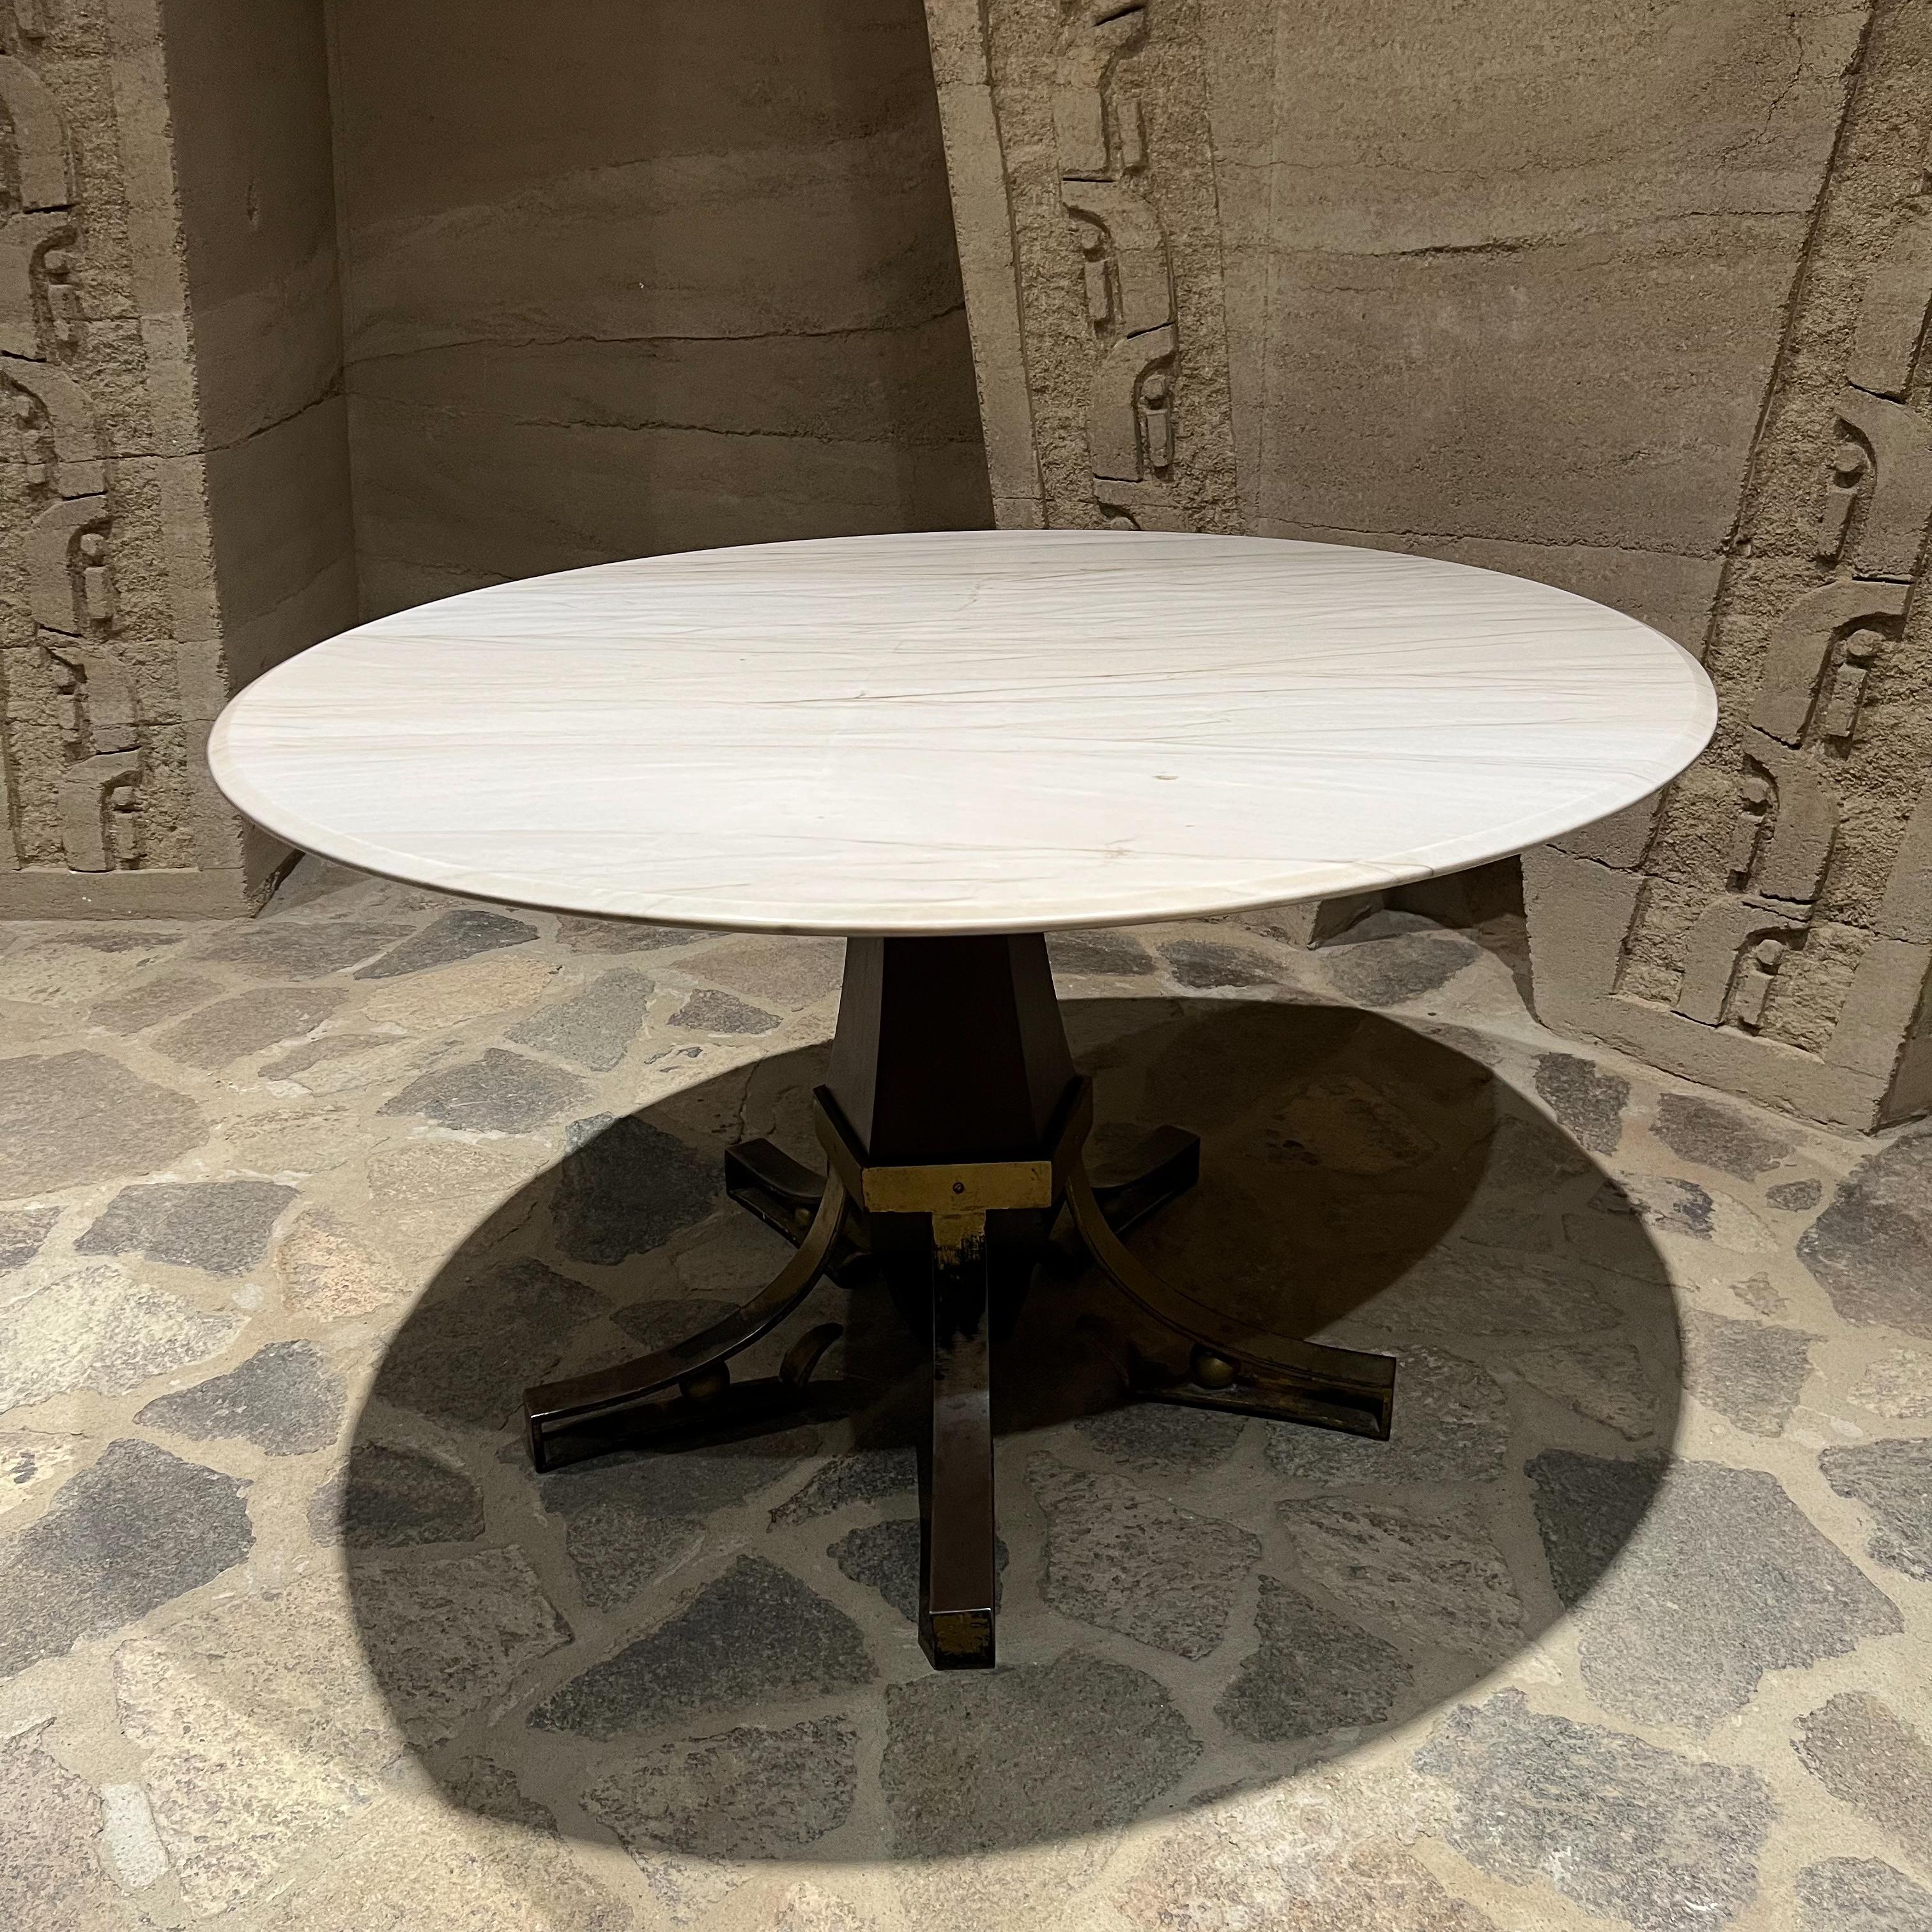 Iron Modernist Dining Table in White Marble Sculptural Base Arturo Pani Mexico City For Sale